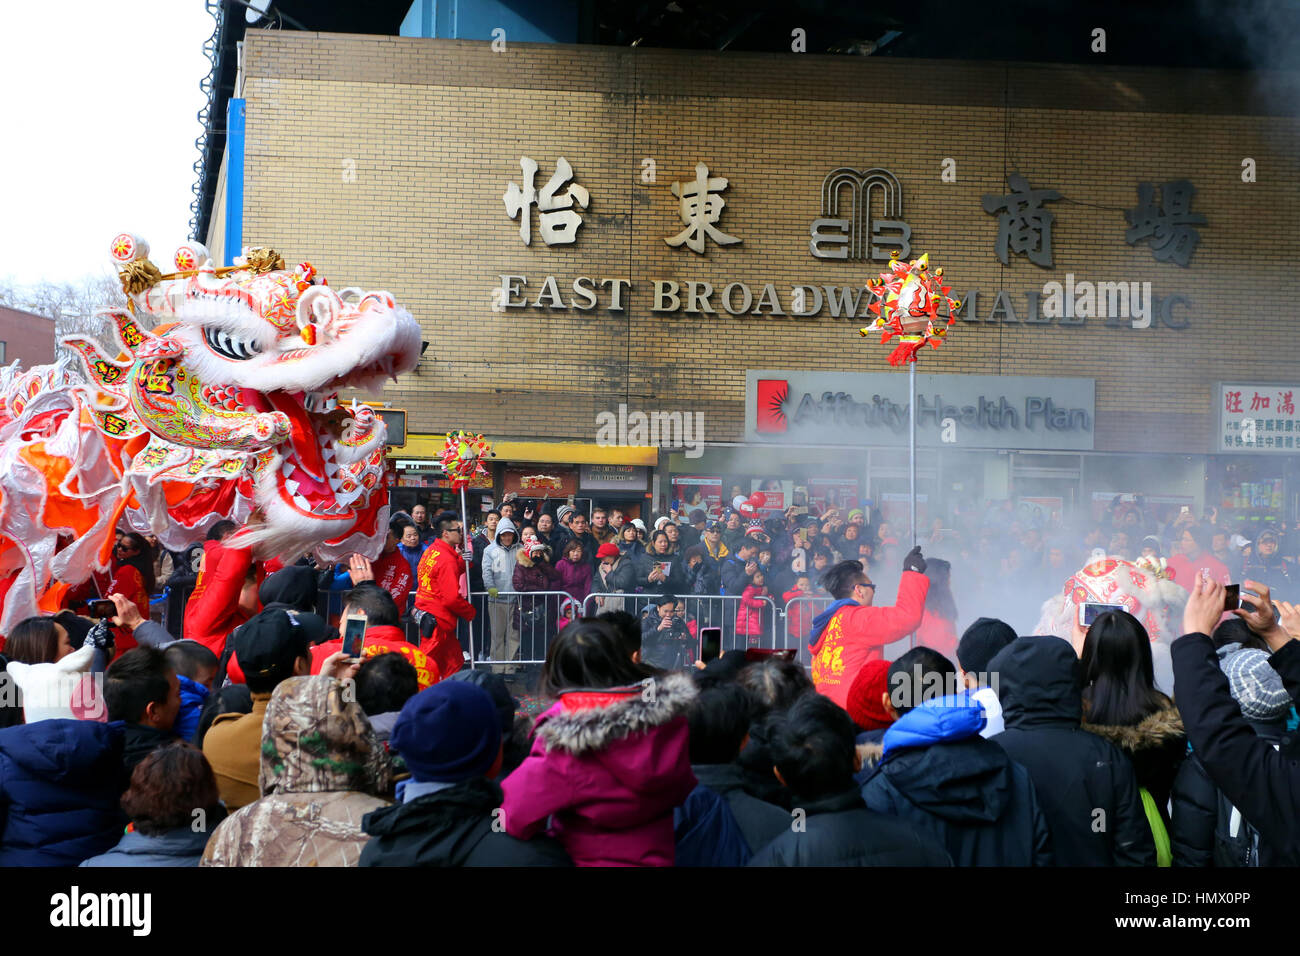 New York, USA. 05th Feb, 2017. New York Chinatown celebrating the Lunar New Year, Year of the Rooster with Lion Dances, Dragon dances, and a big parade. Credit: Robert K. Chin/Pacific Press/Alamy Live News Stock Photo